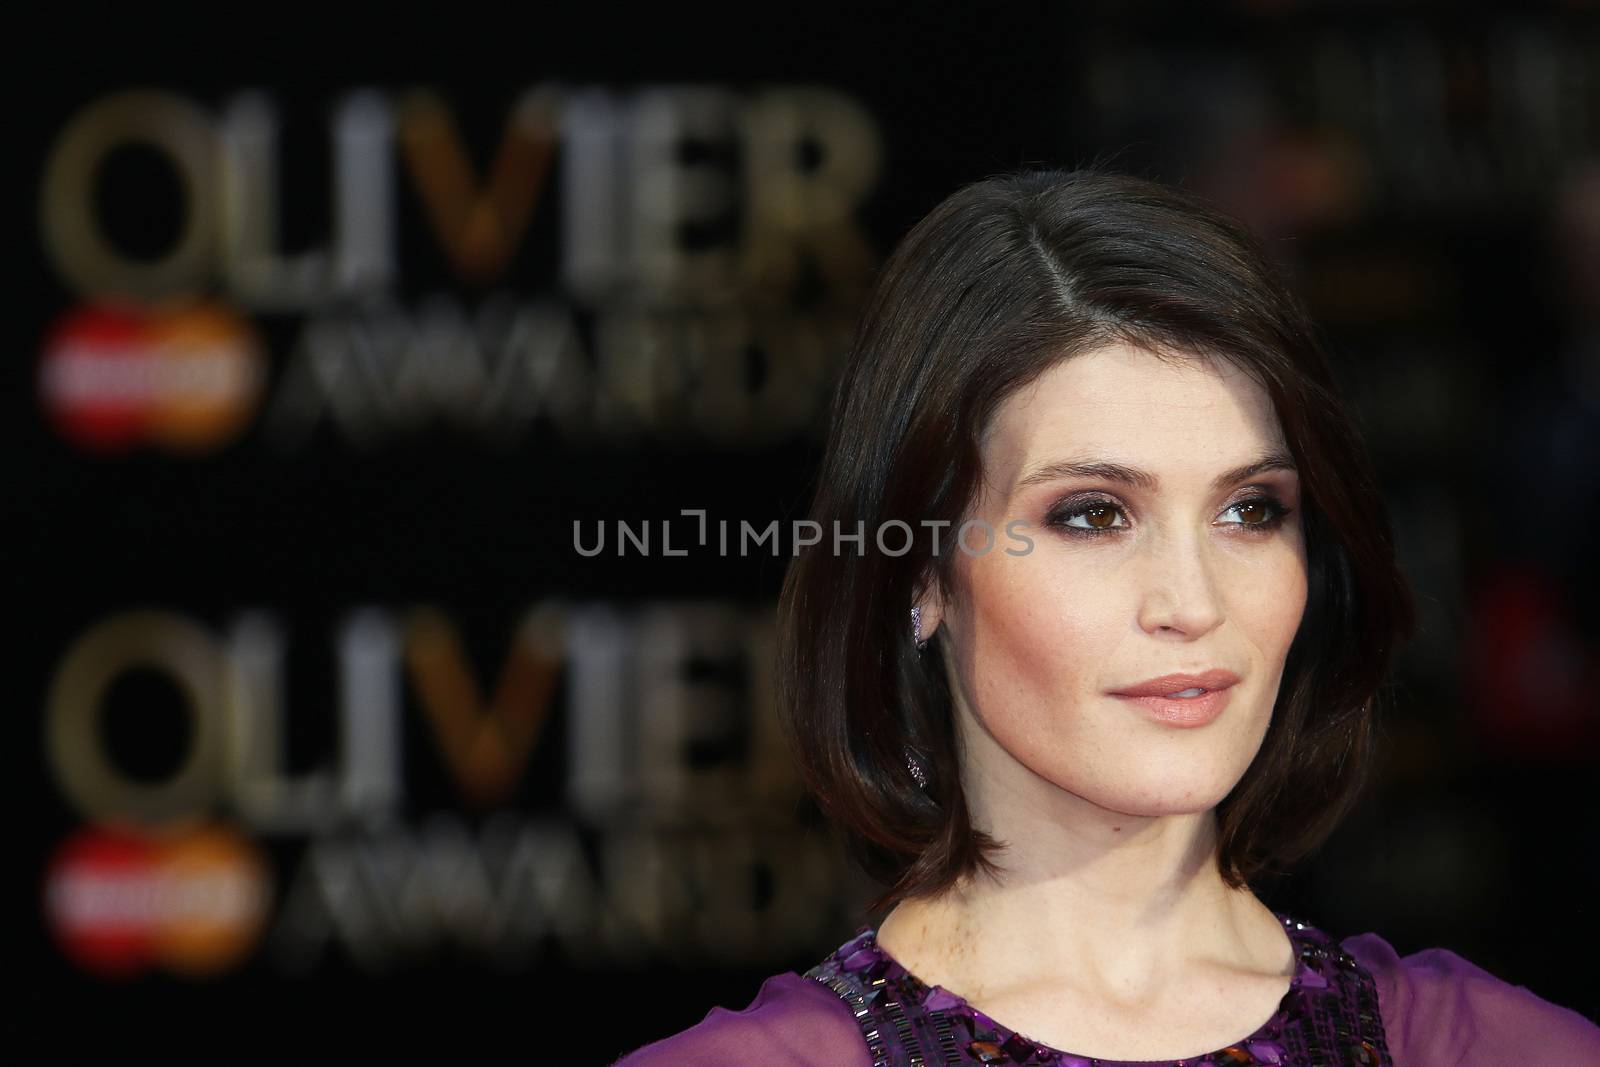 UK, London: Gemma Arterton hits the red carpet for the Olivier Awards at the Royal Opera House in London on April 3, 2016.